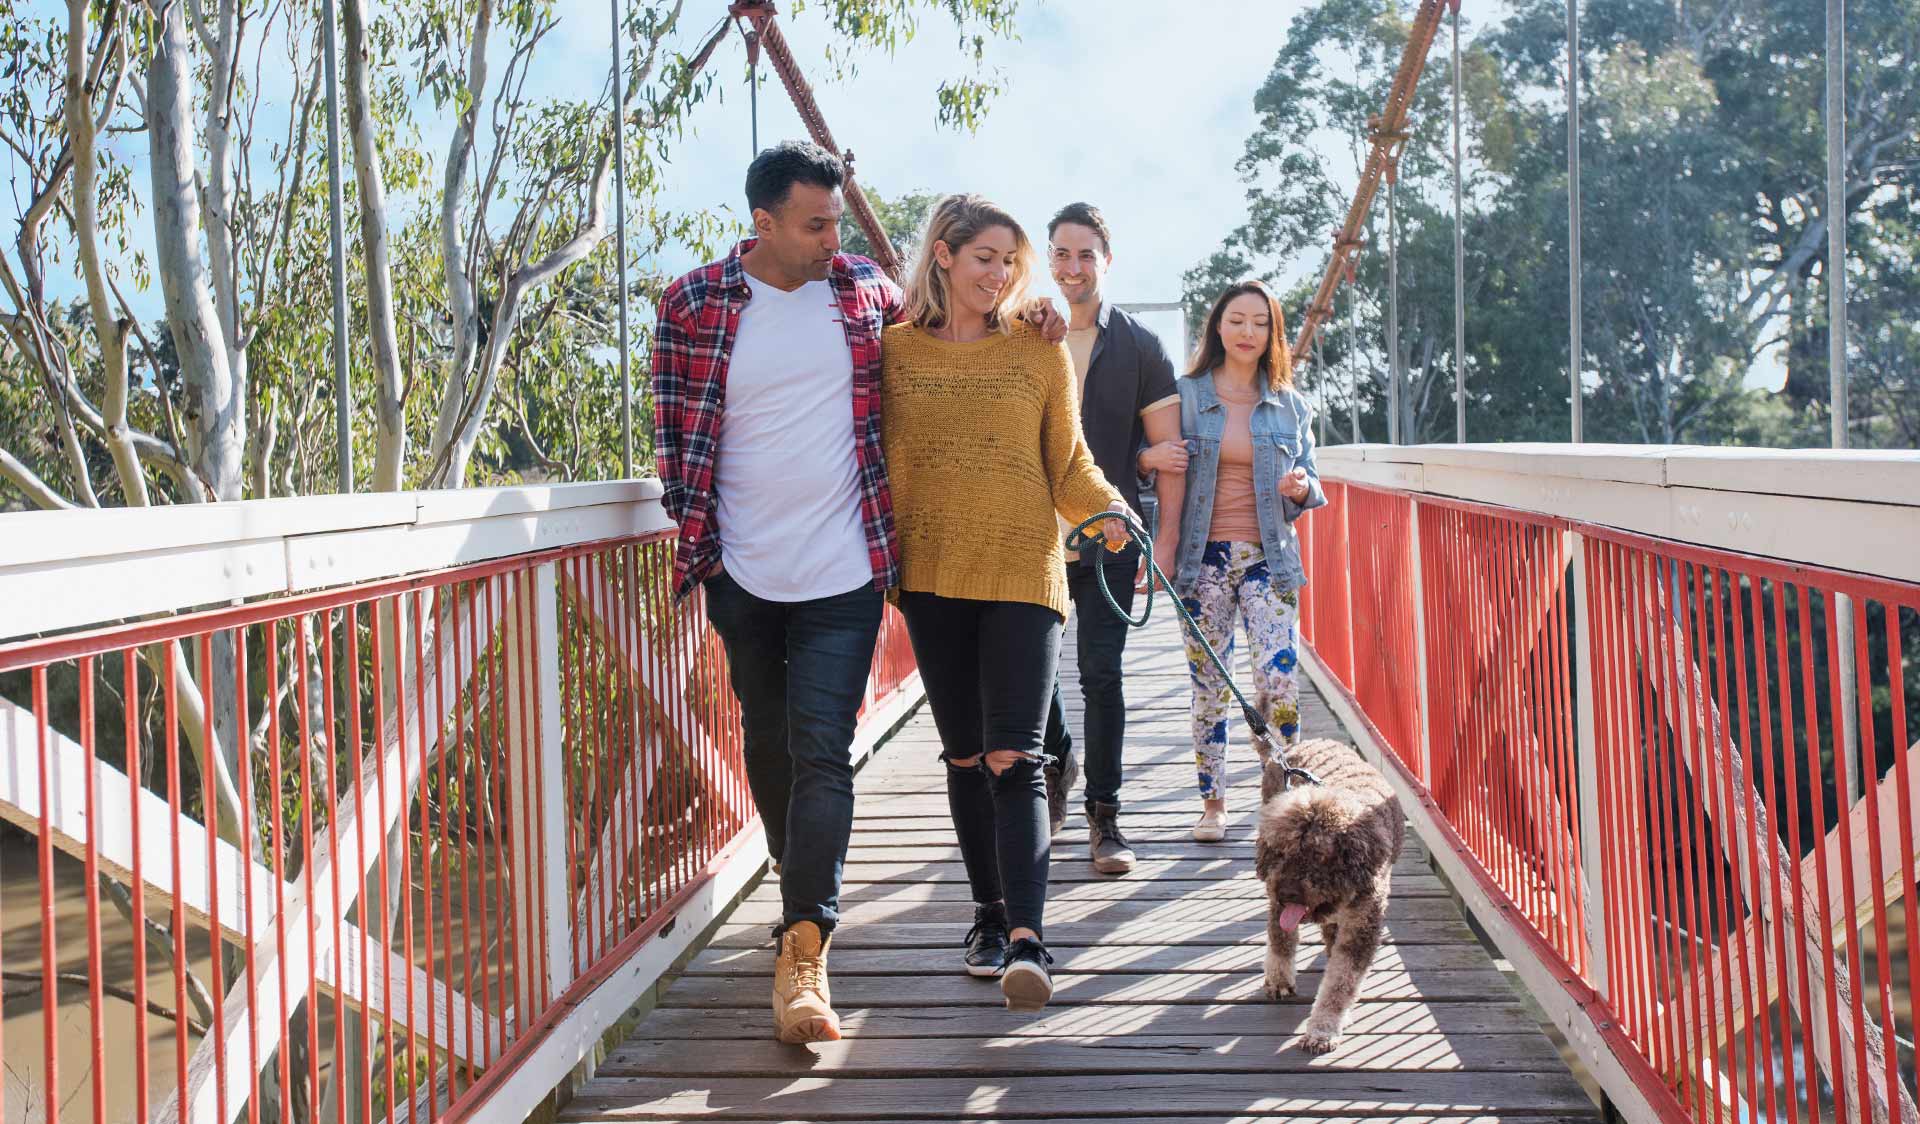 A young couple walking their dog across a bridge with two friends following behind